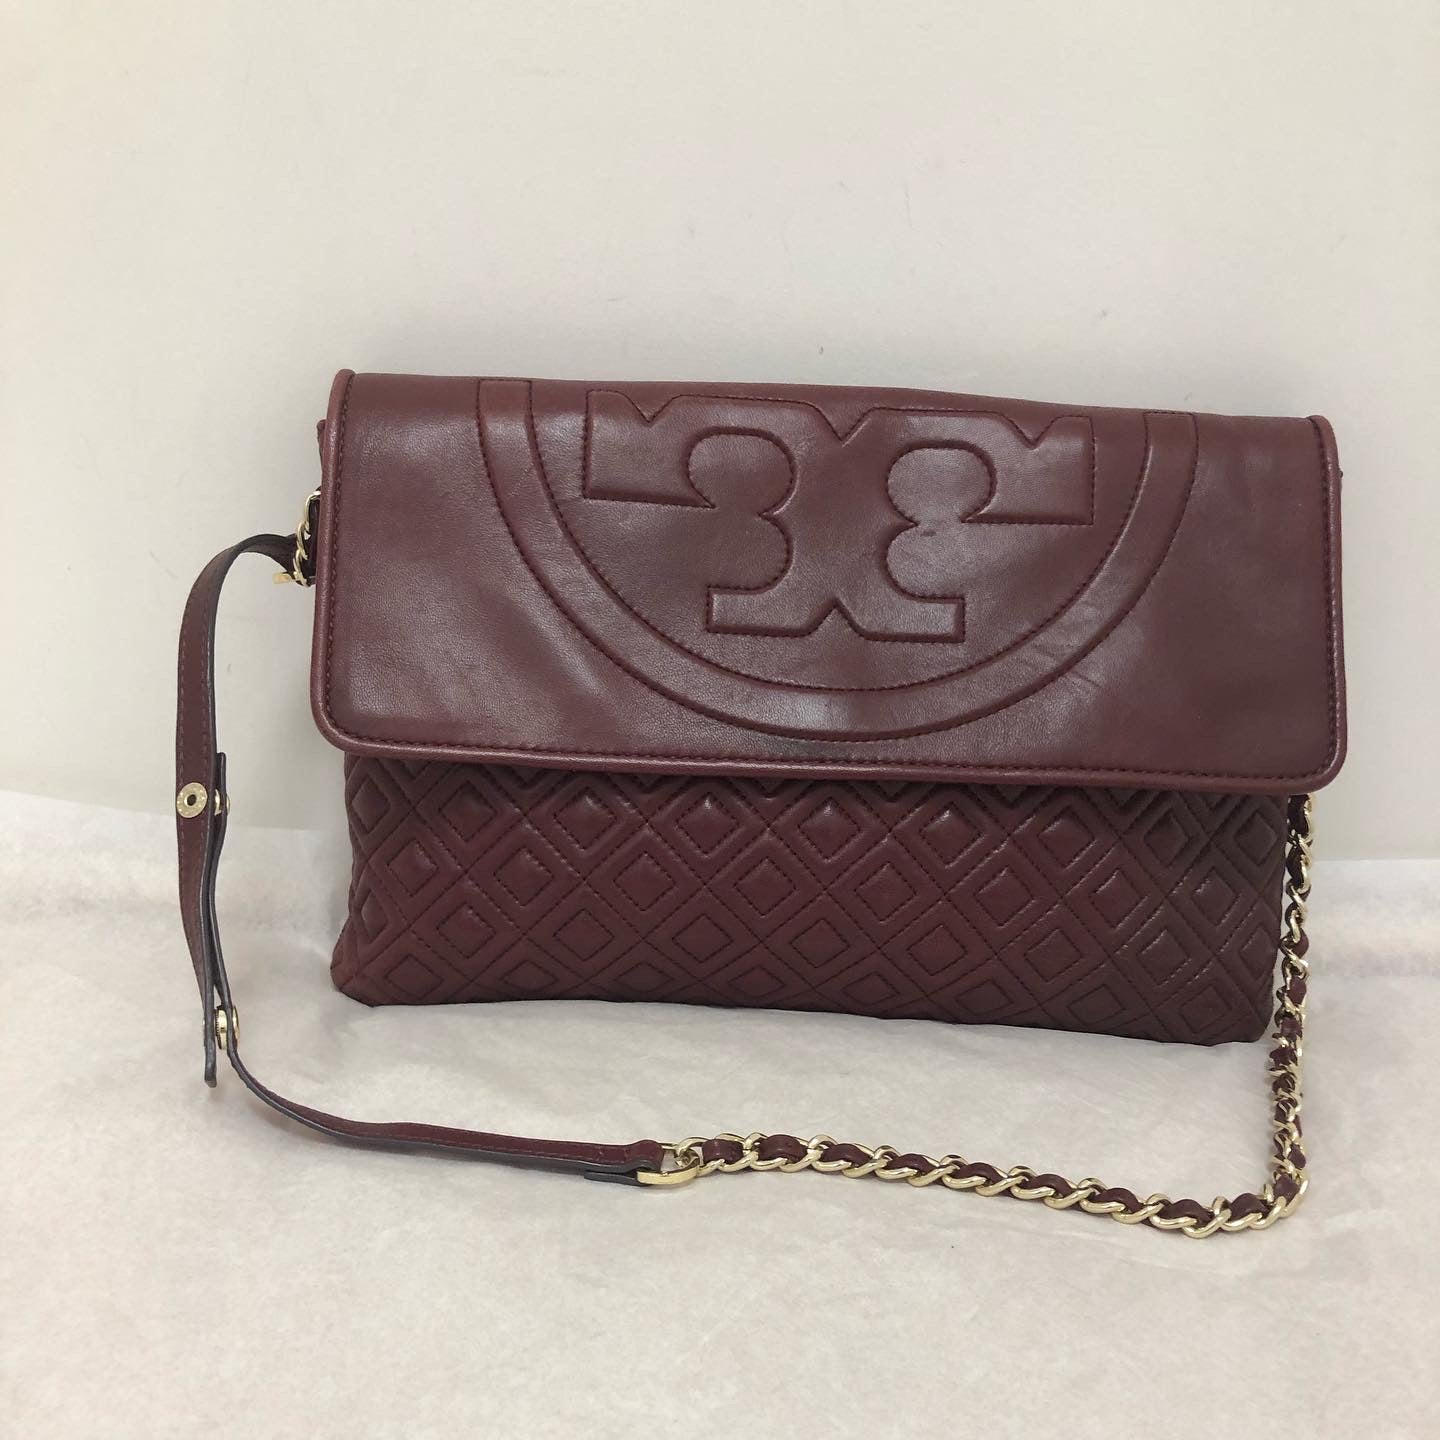 Tory Burch Burgundy Leather Quilted Flap Handbag – Thrill of the Find